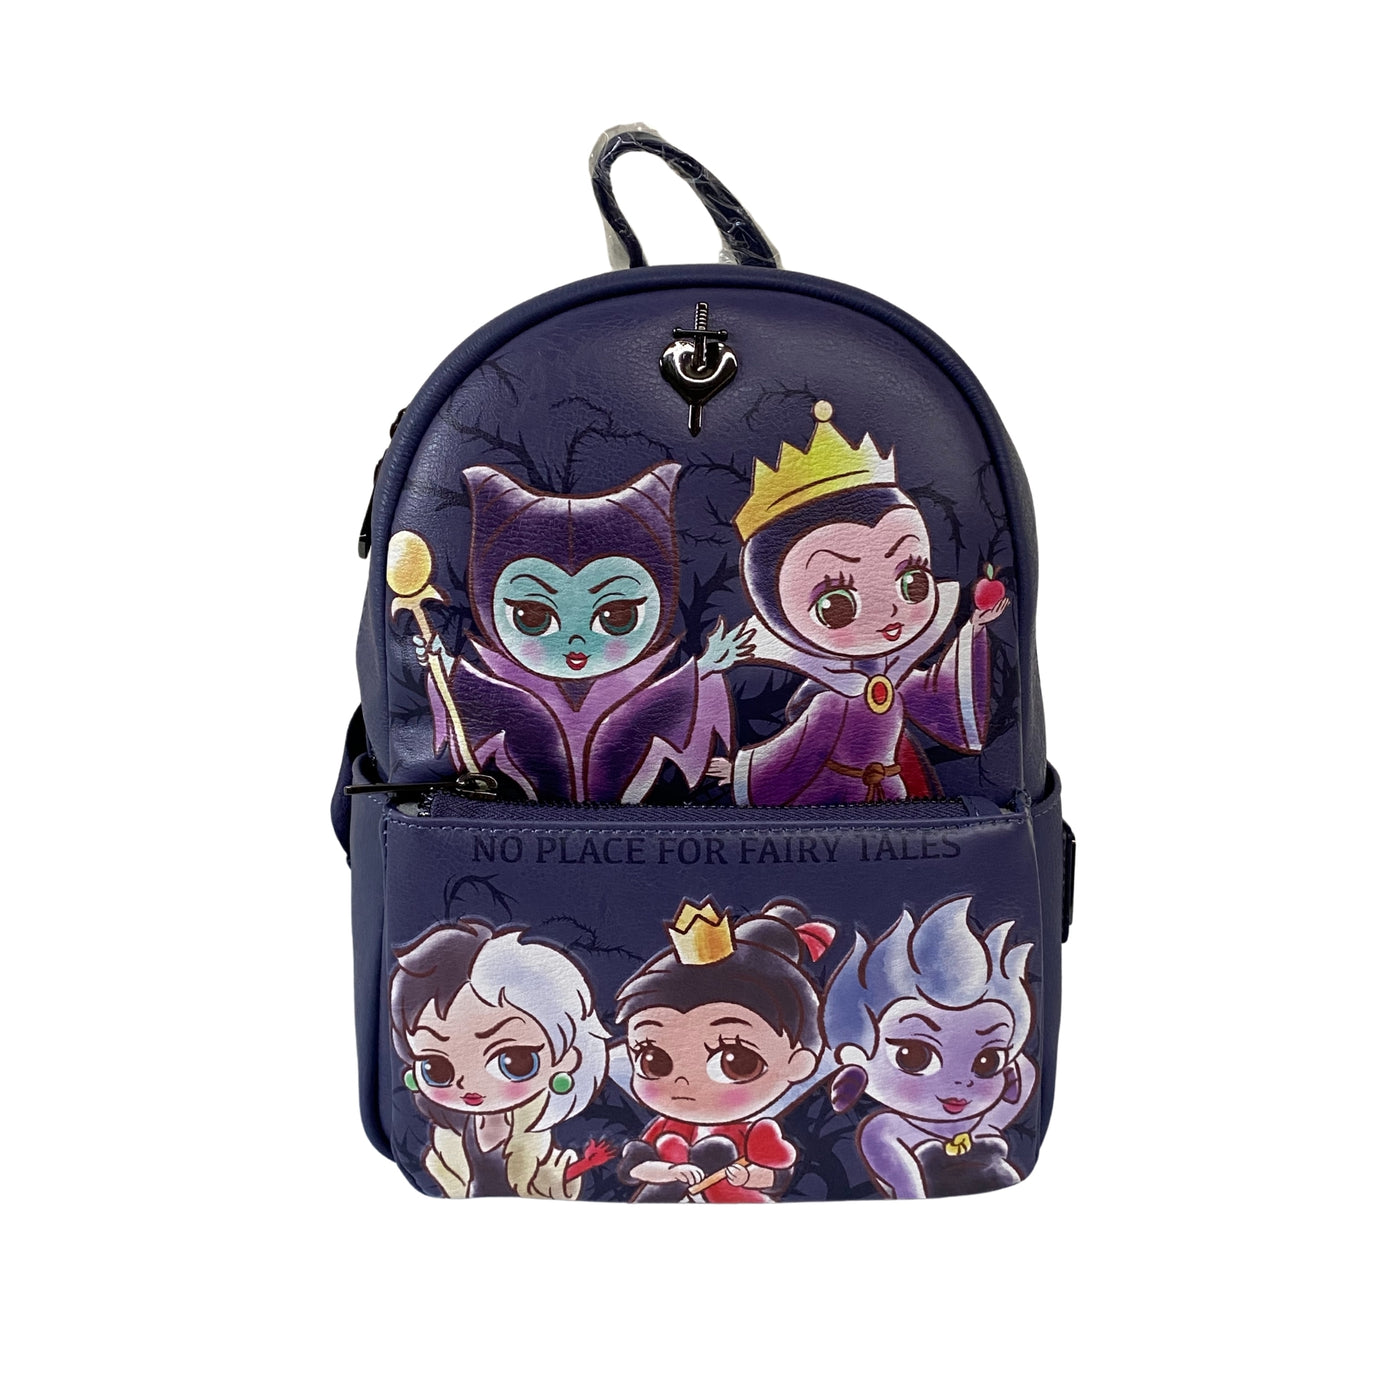 Backpack Disney Villains Glow-in-the-Dark from the Loungefly collection